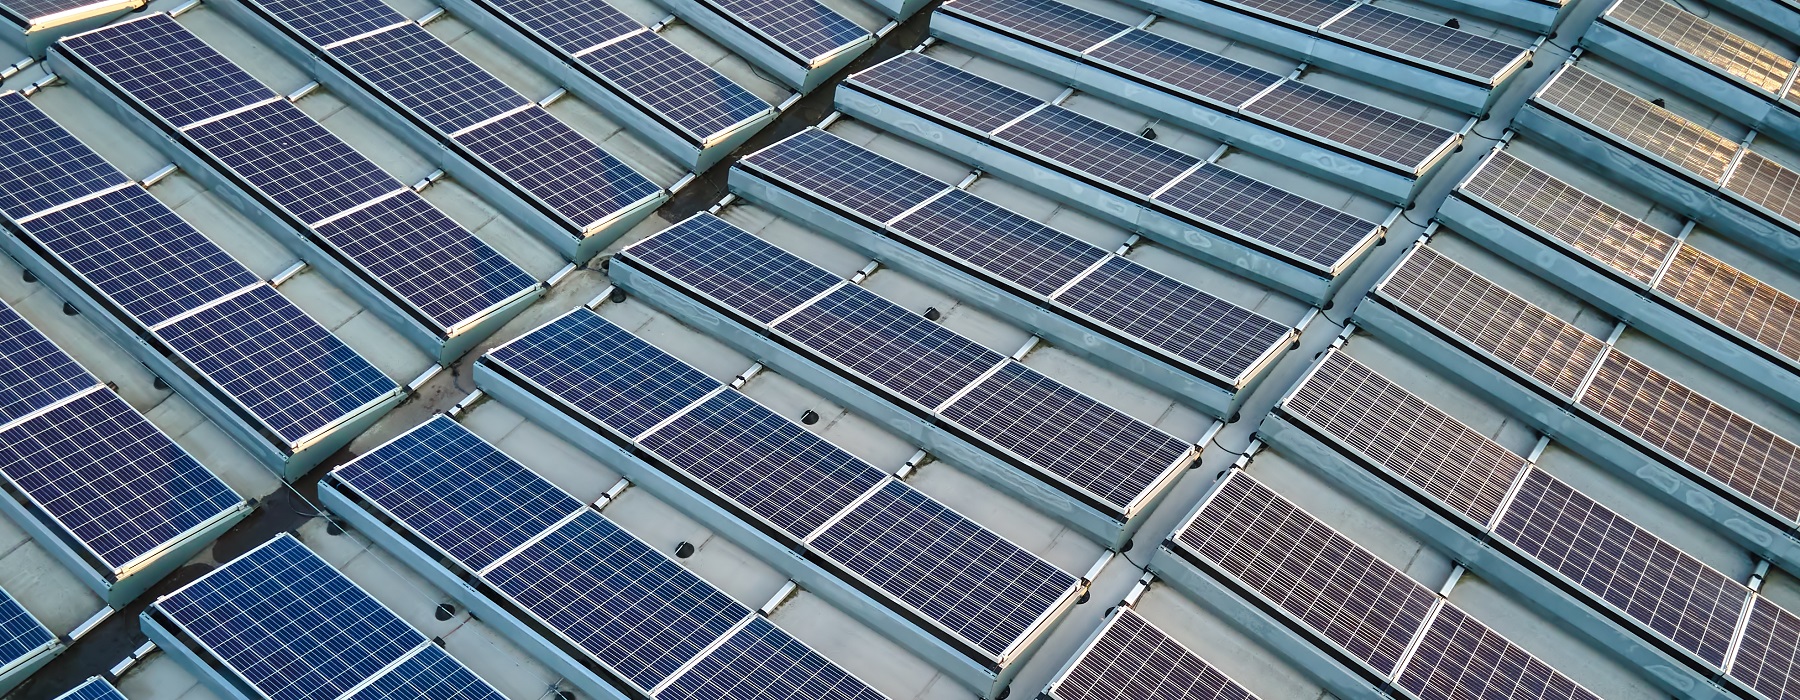 Commercial Solar Panels: 3 Features to Look For Before Your Purchase